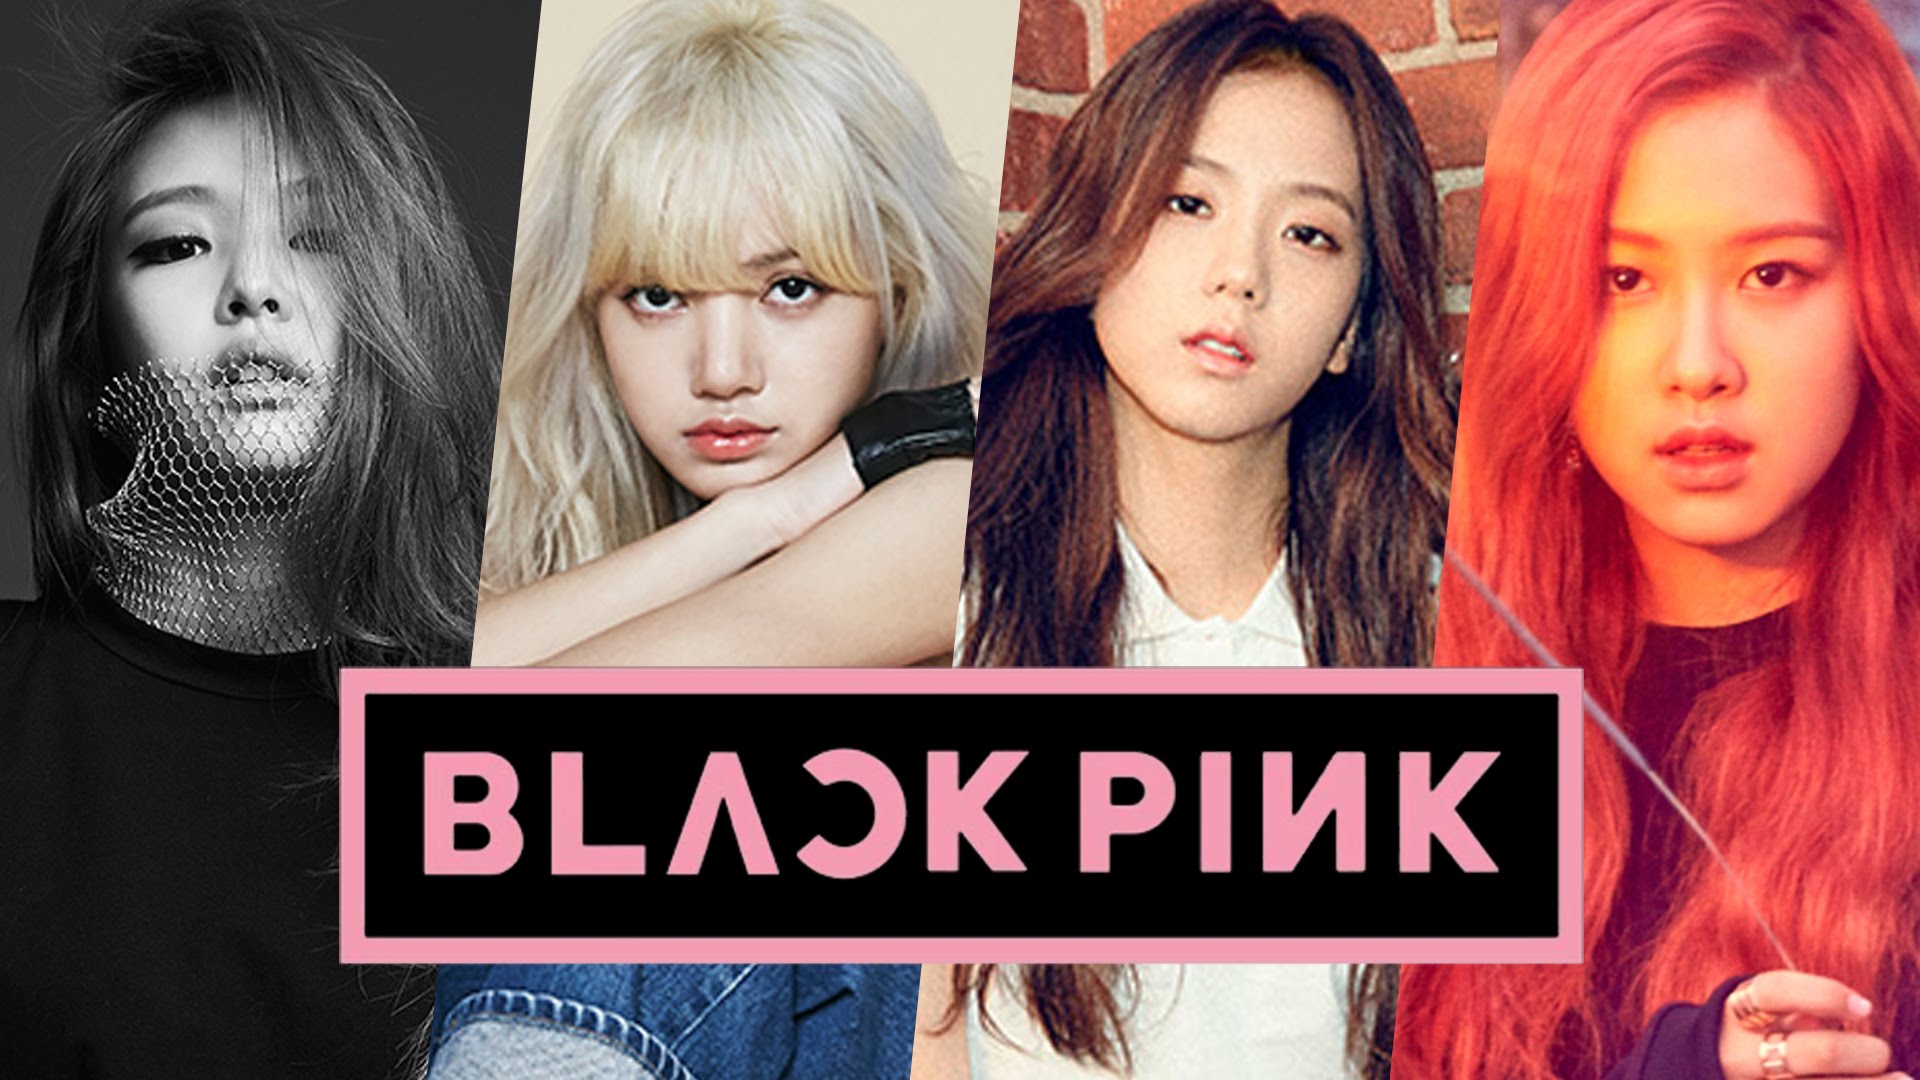 Free Download Black Pink Images Blackpink Hd Wallpaper And Background Photos 1920x1080 For Your Desktop Mobile Tablet Explore 15 Blackpink Wallpapers Blackpink Wallpapers Blackpink Lisa Wallpapers Blackpink Whistle Wallpapers